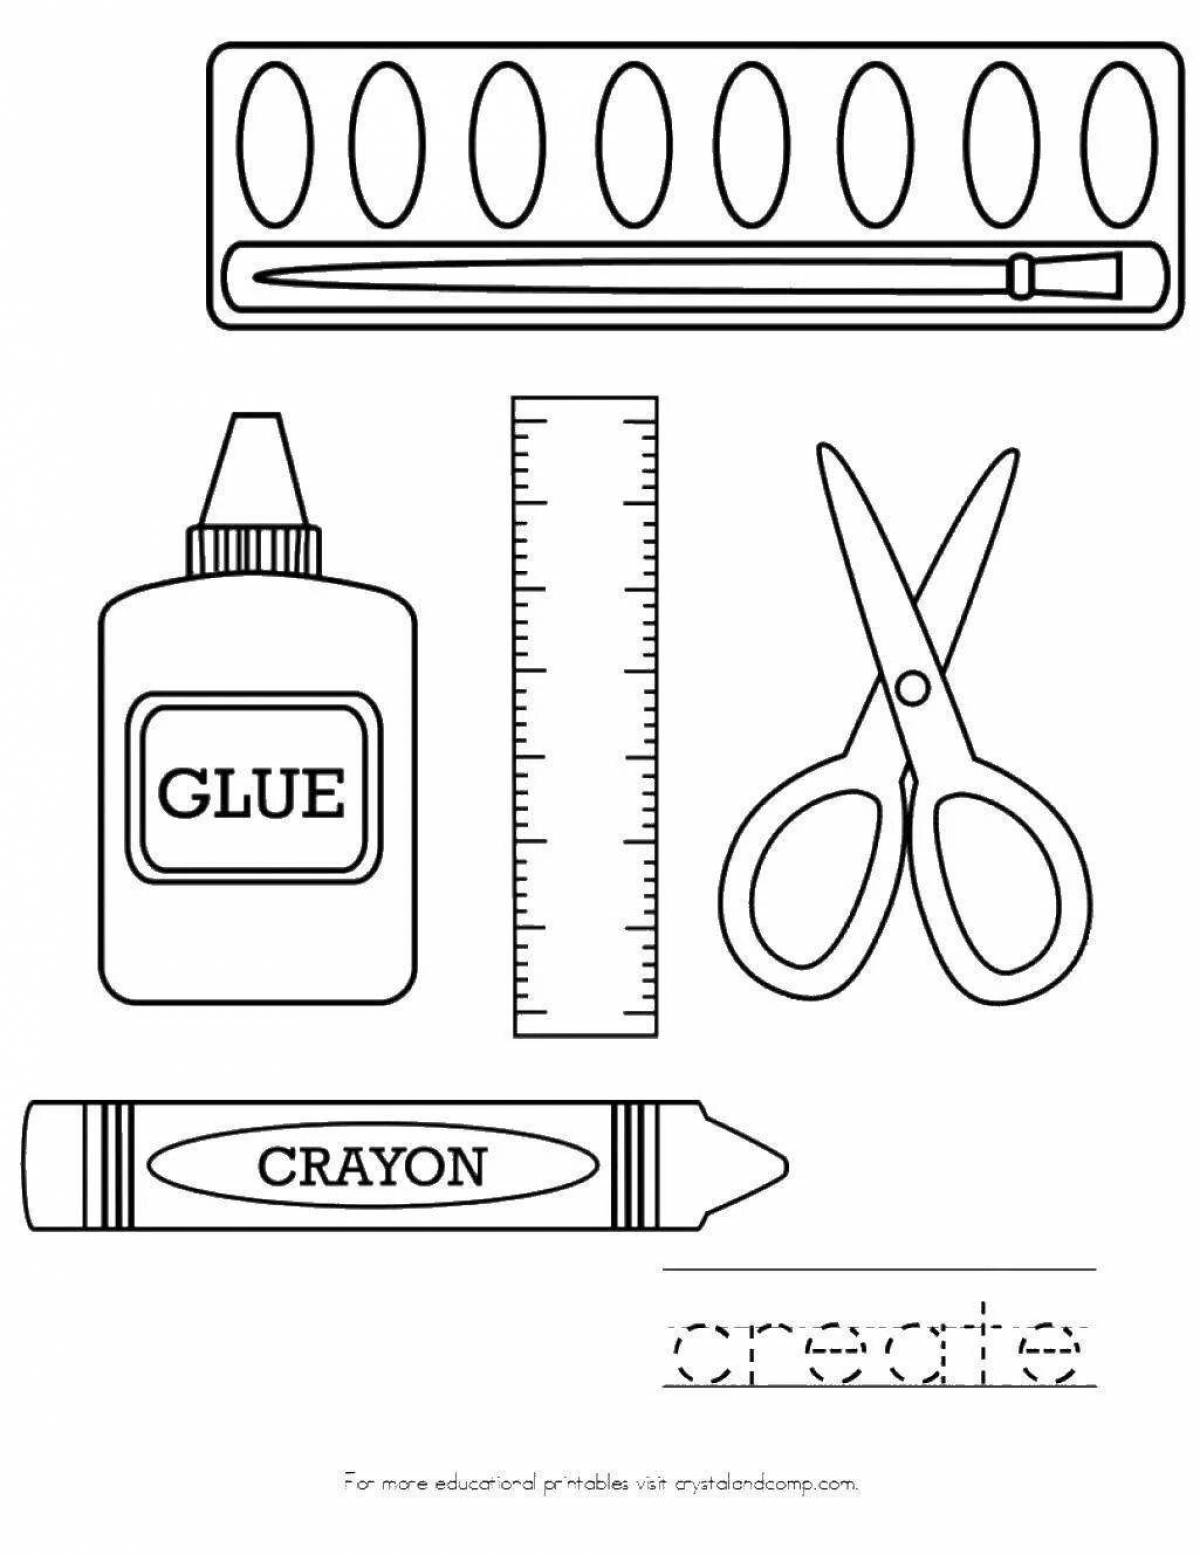 Coloring pages with innovative colors